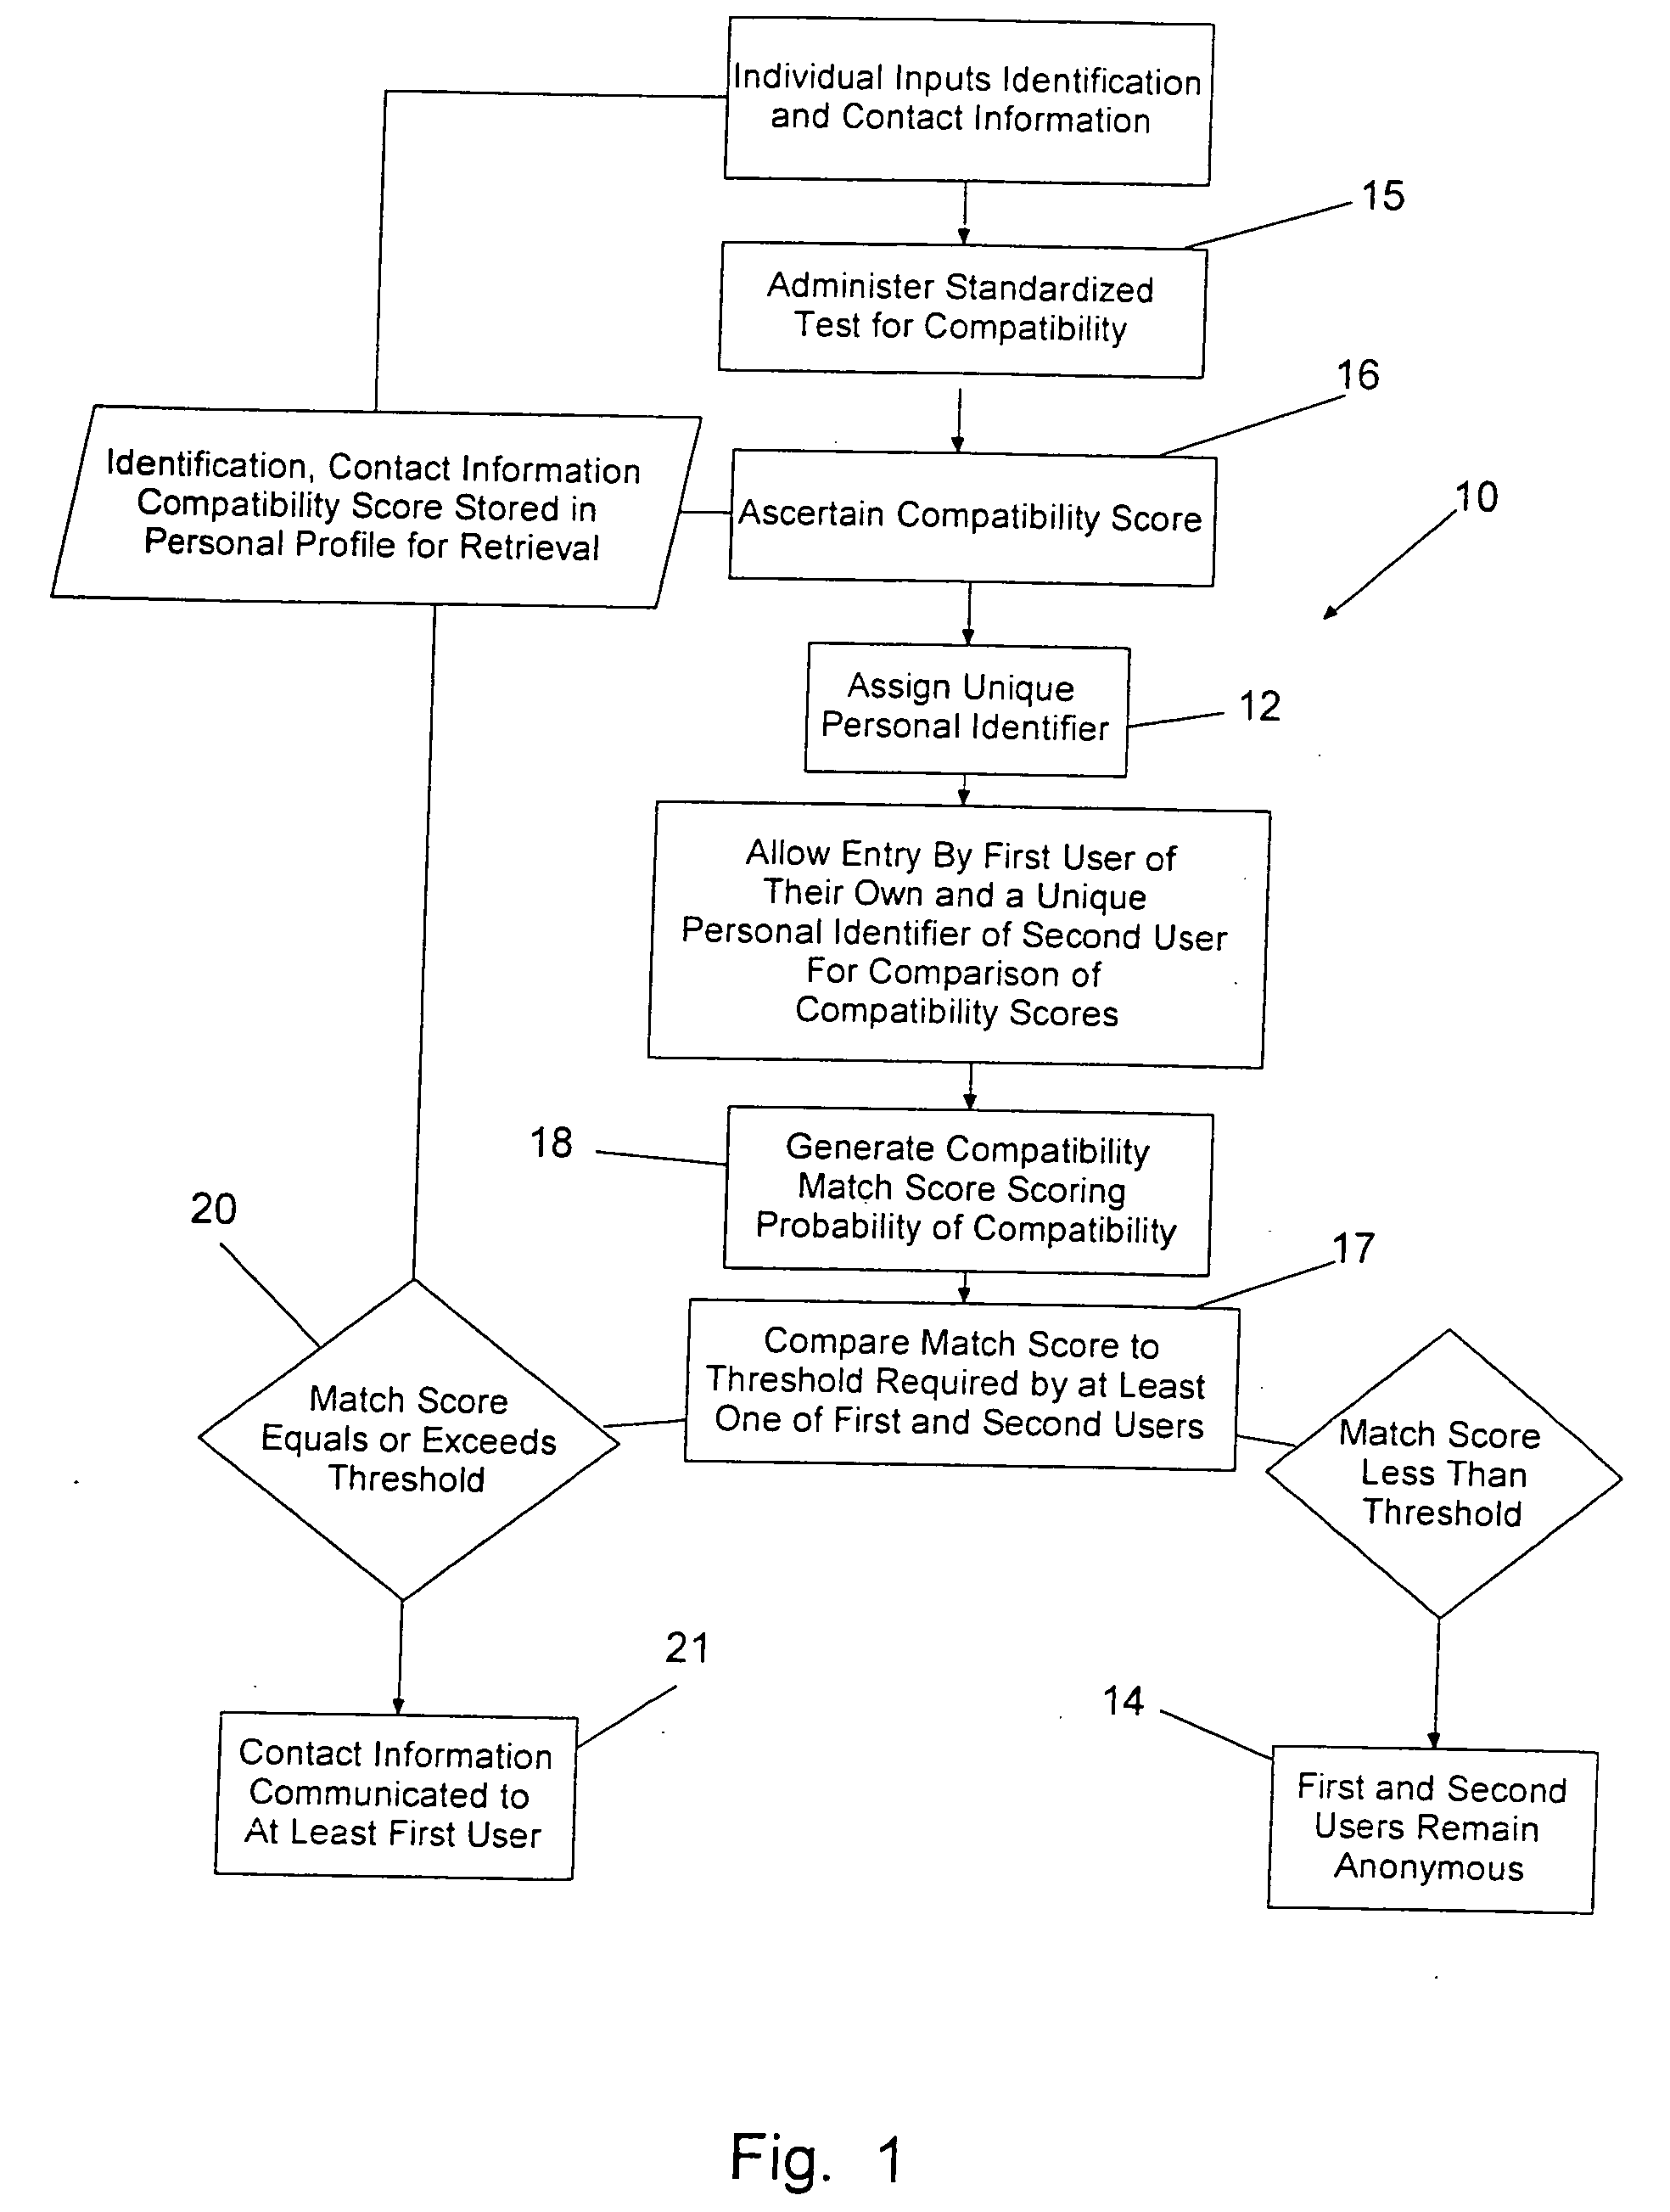 System and method for anonymous dating compatibility determination